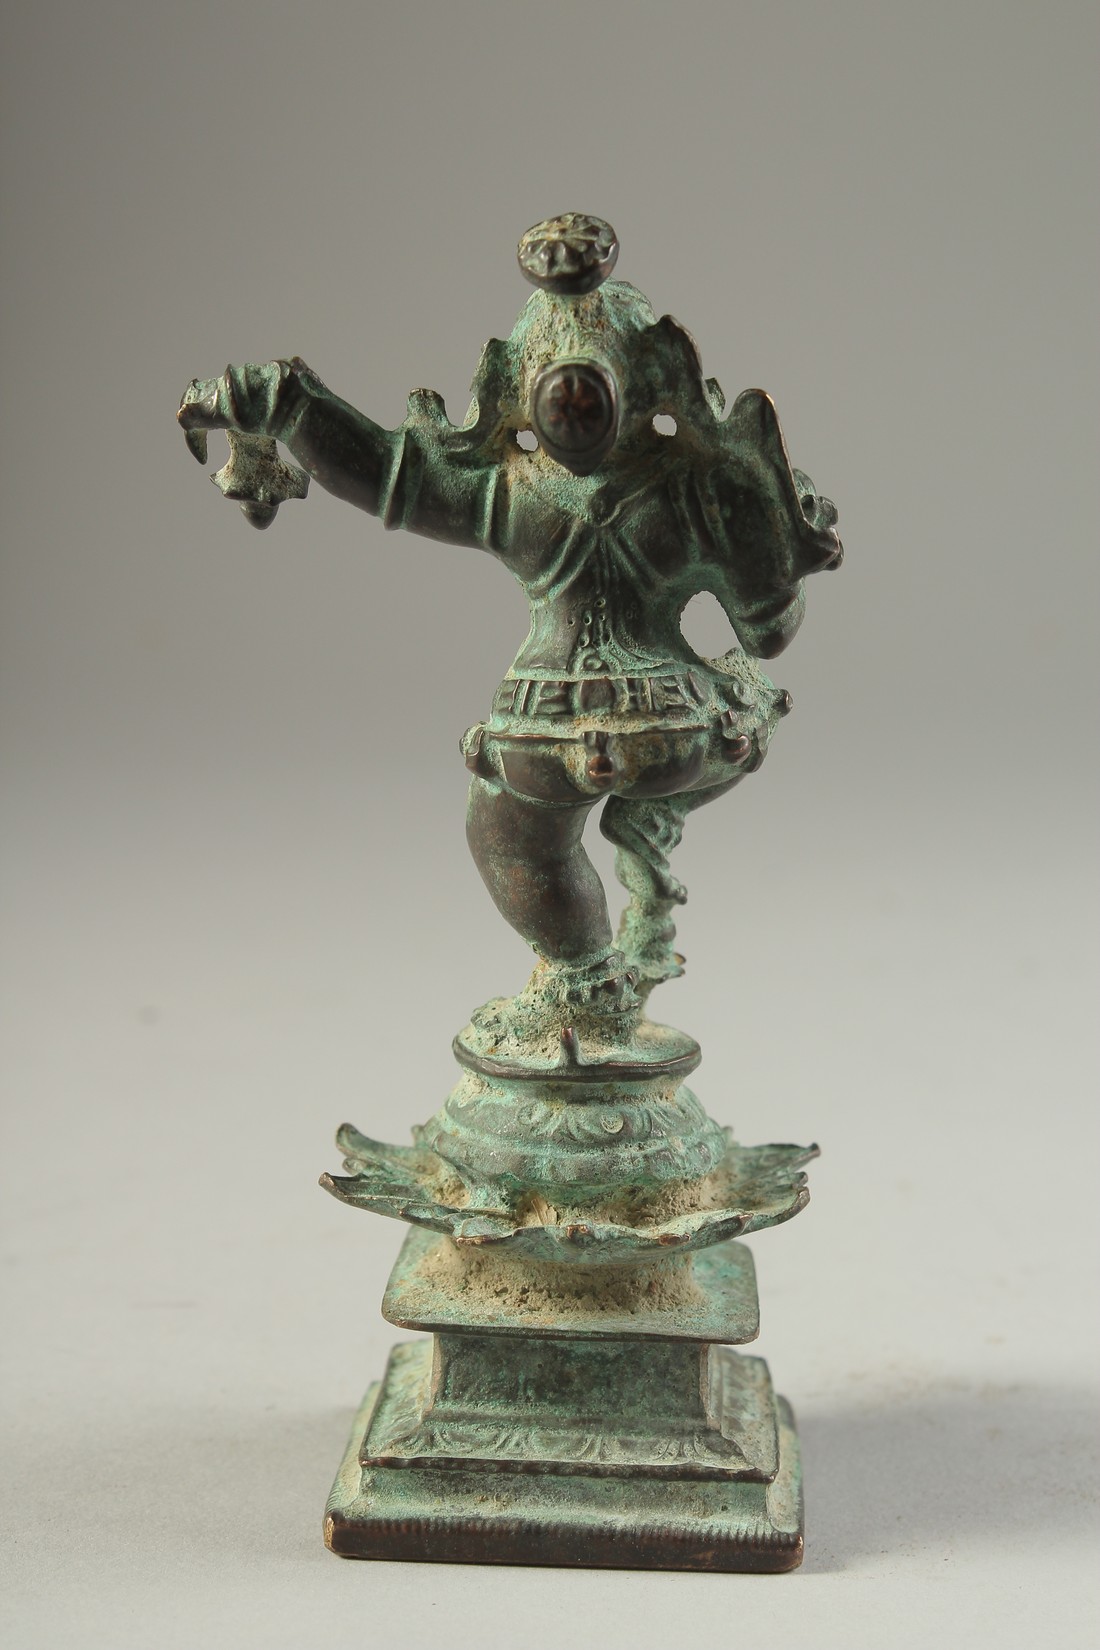 A FINE 16TH-17TH CENTURY SOUTH INDIAN BRONZE FIGURE OF BABY KRISHNA, stand on a lotus form base, - Image 3 of 4